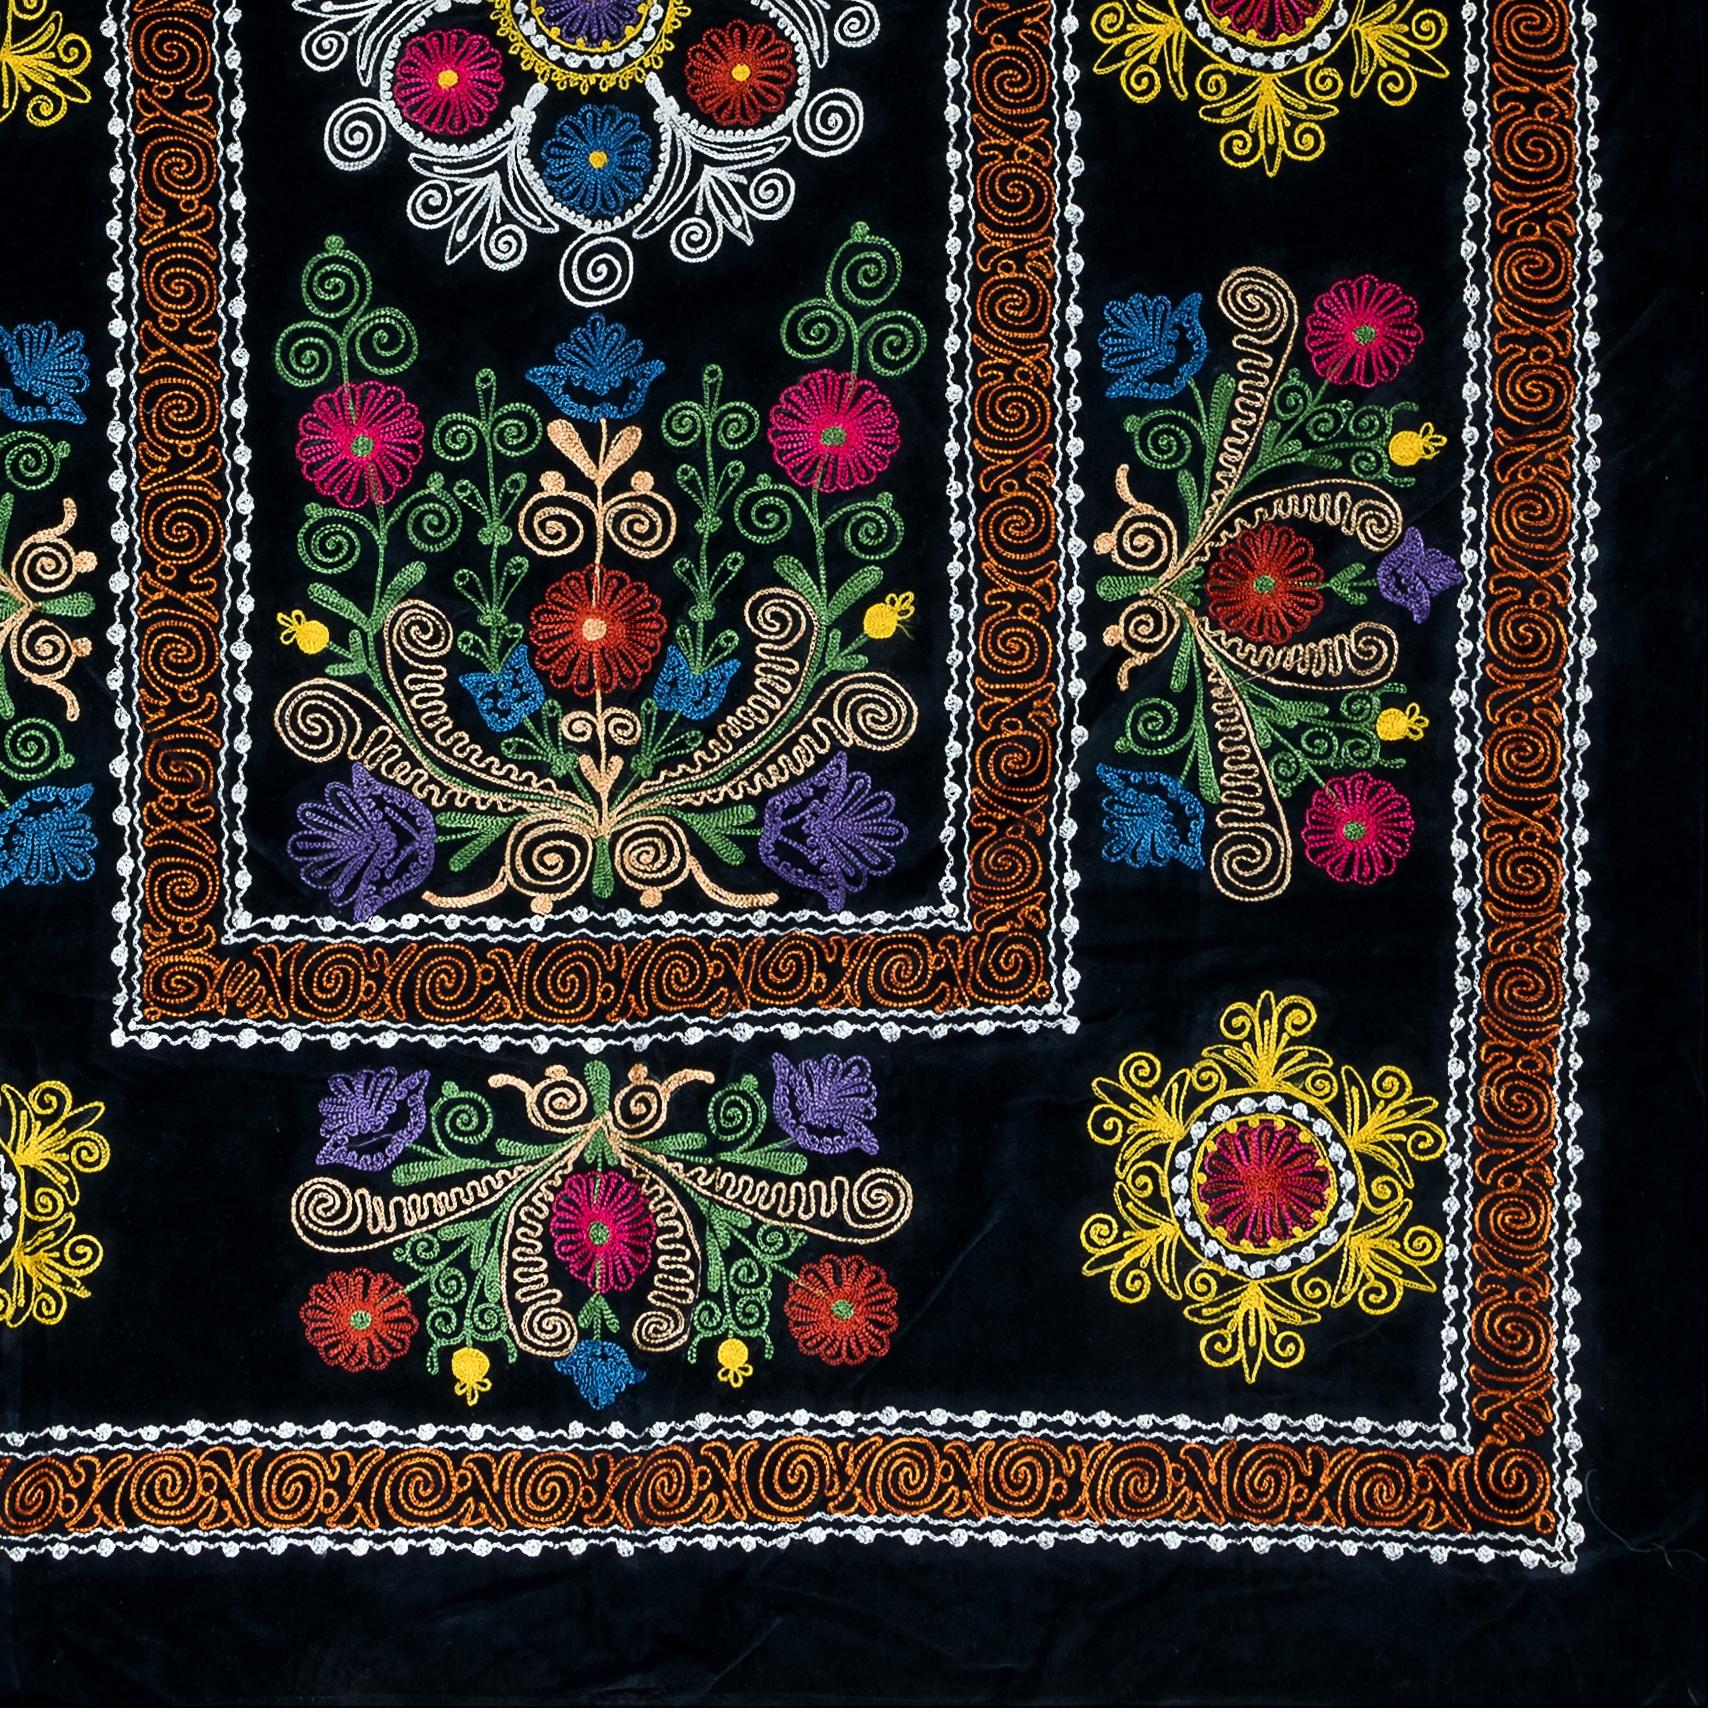 Uzbek 4.5x6.8 Ft Decorative Silk Embroidered Bed Cover, Black Handmade Wall Hanging For Sale